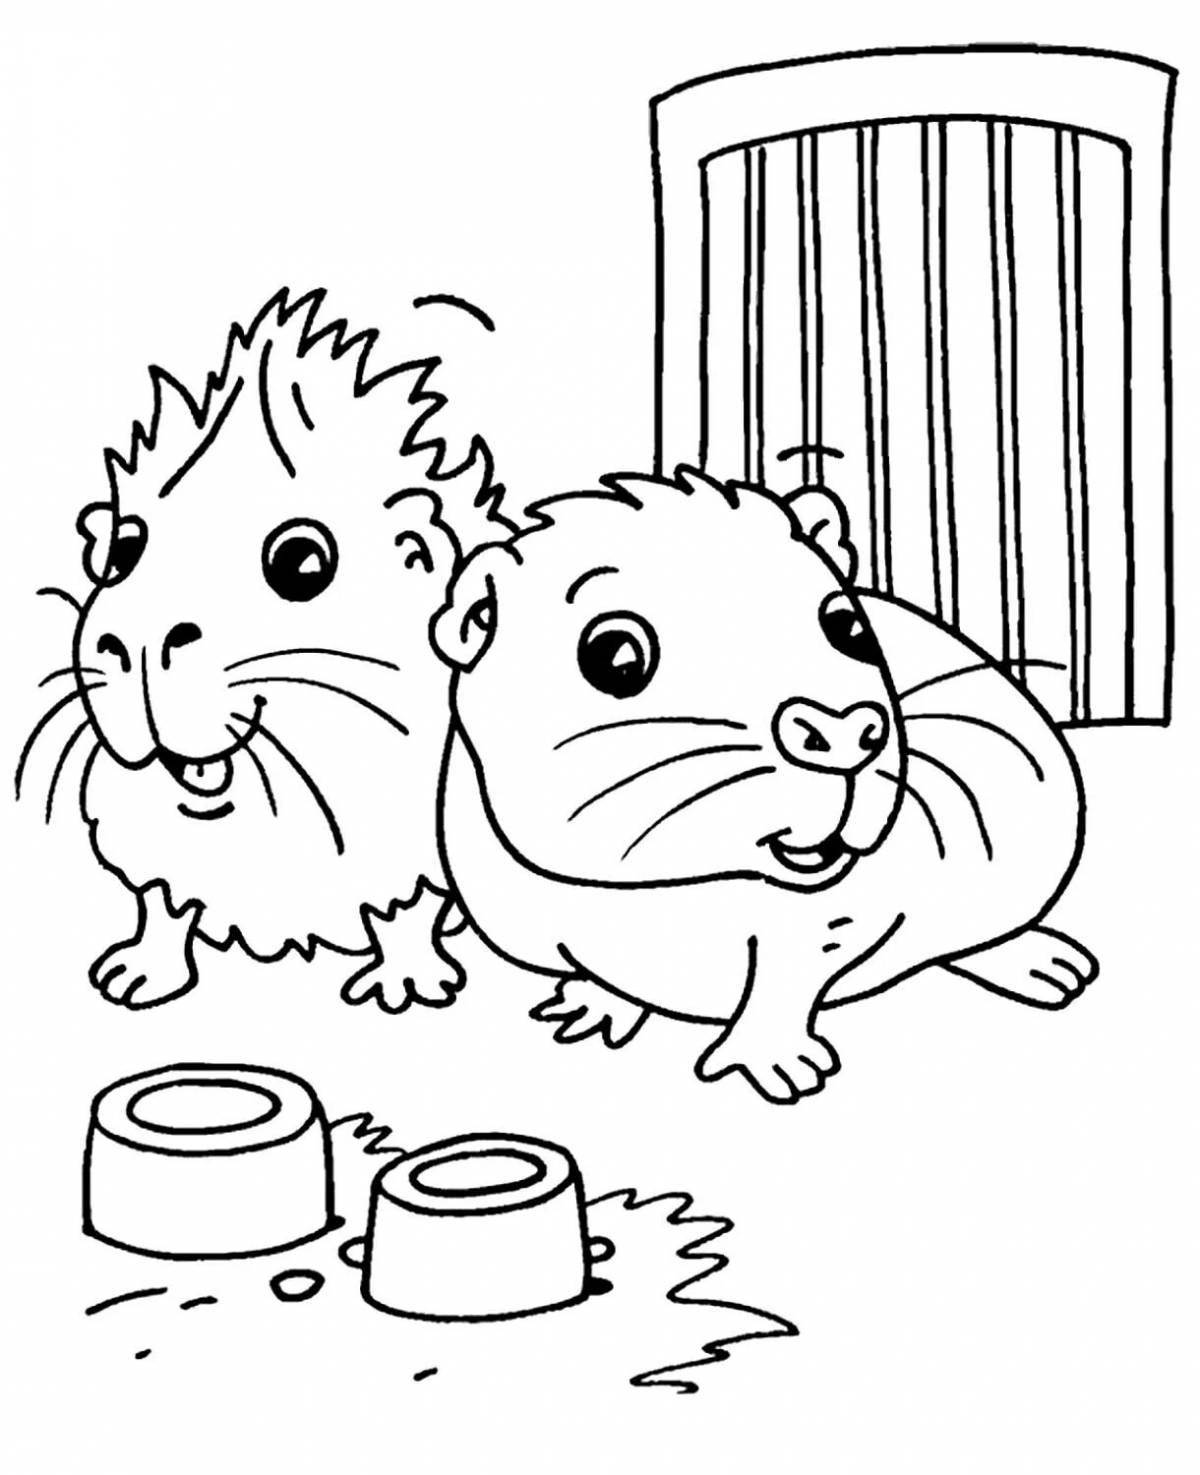 Live hamster in a cage coloring book